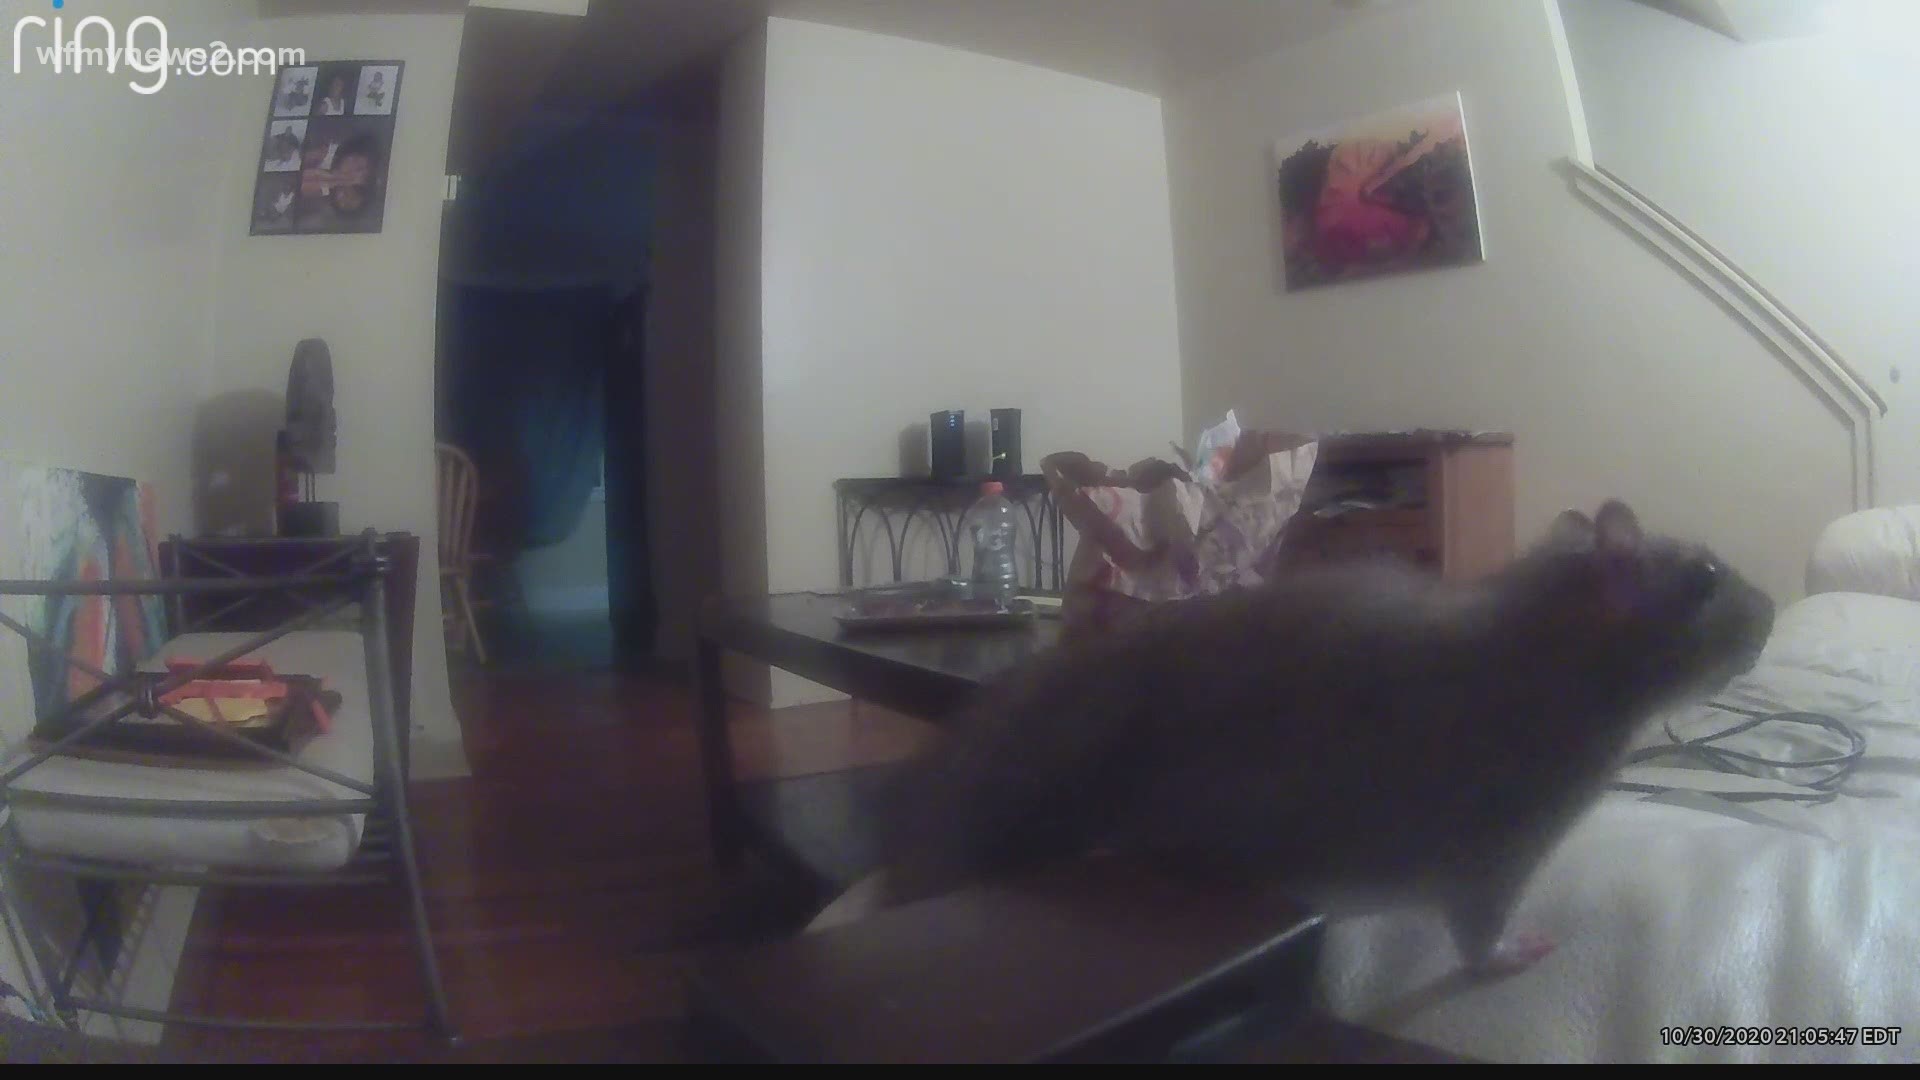 2 Wants to Know contacted management after a Triad woman spotted rats in her apartment.